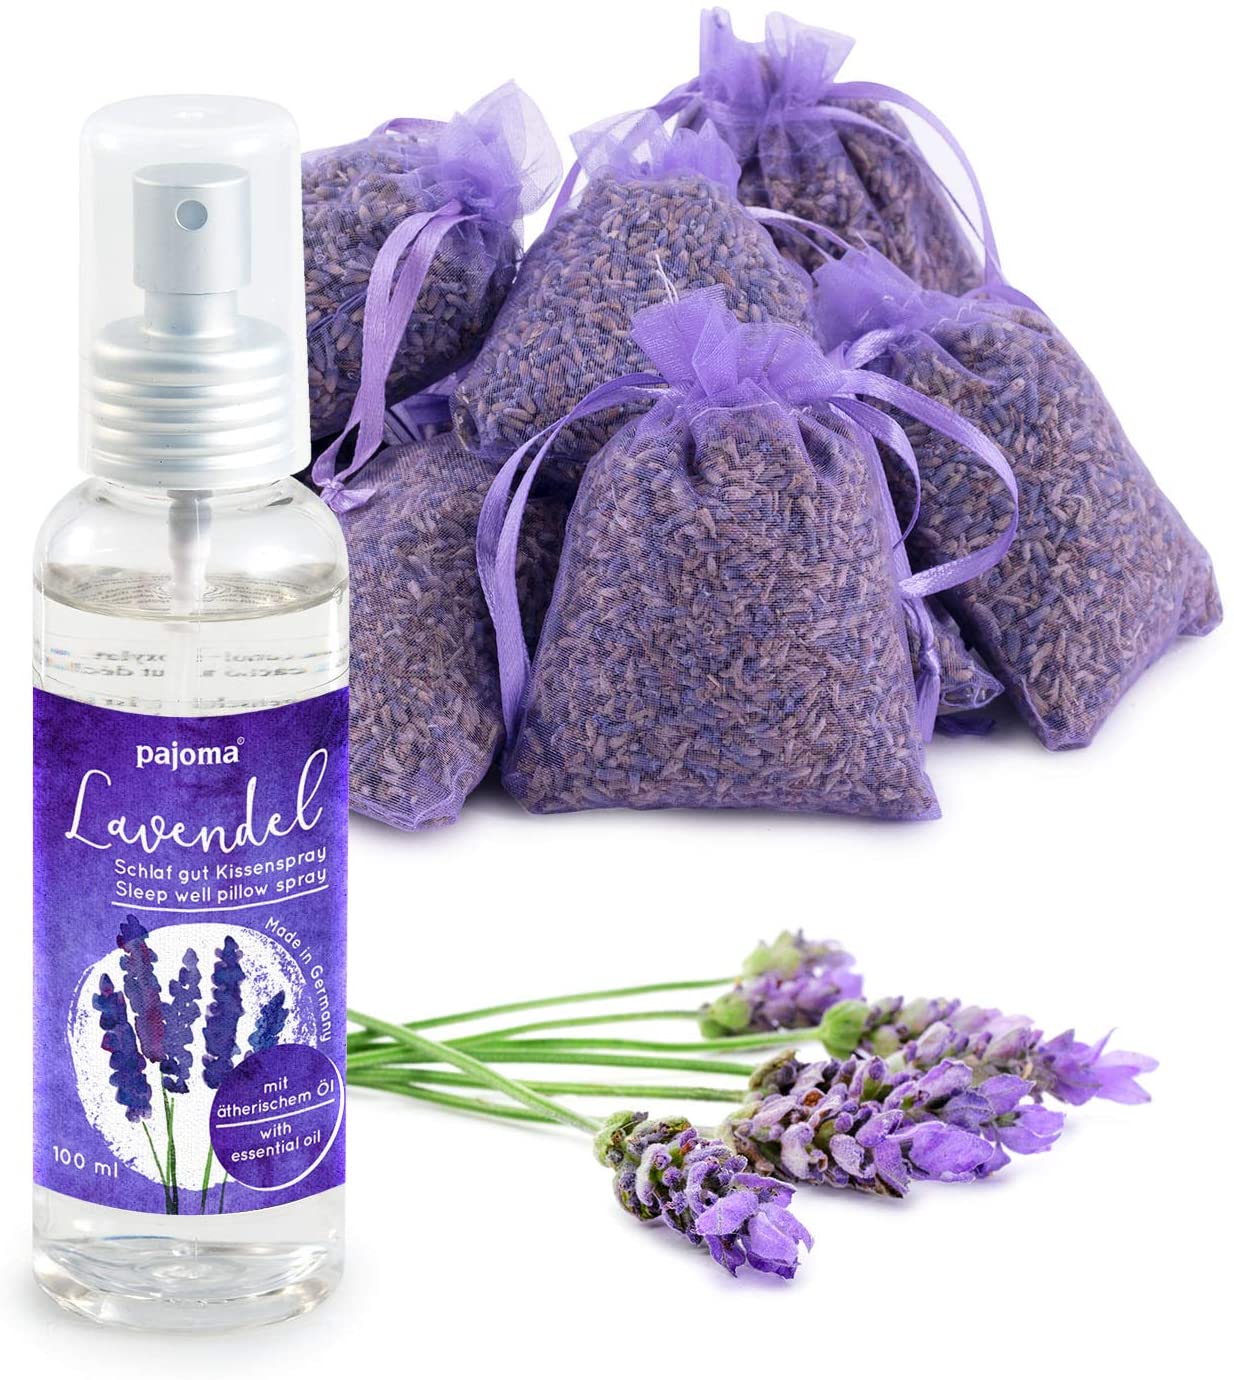 Pajoma 10 Lavender Bags Plus 100% Natural Pure Essential Cushion Spray Lave